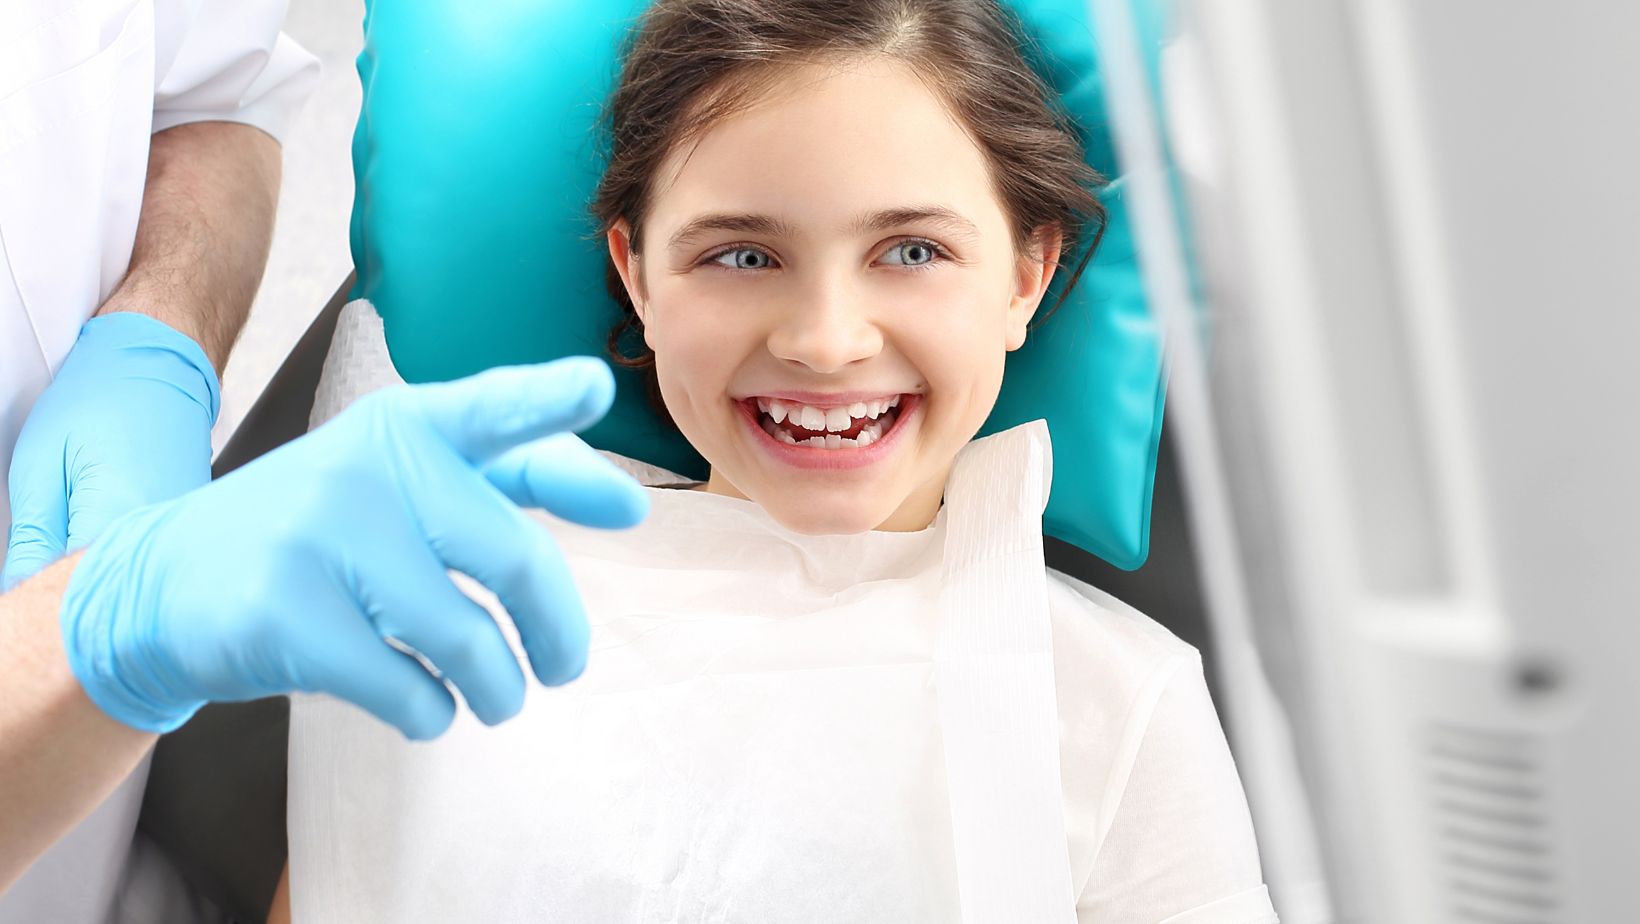 What Are Dental Sealants Made Of? (And Are They Toxic?)